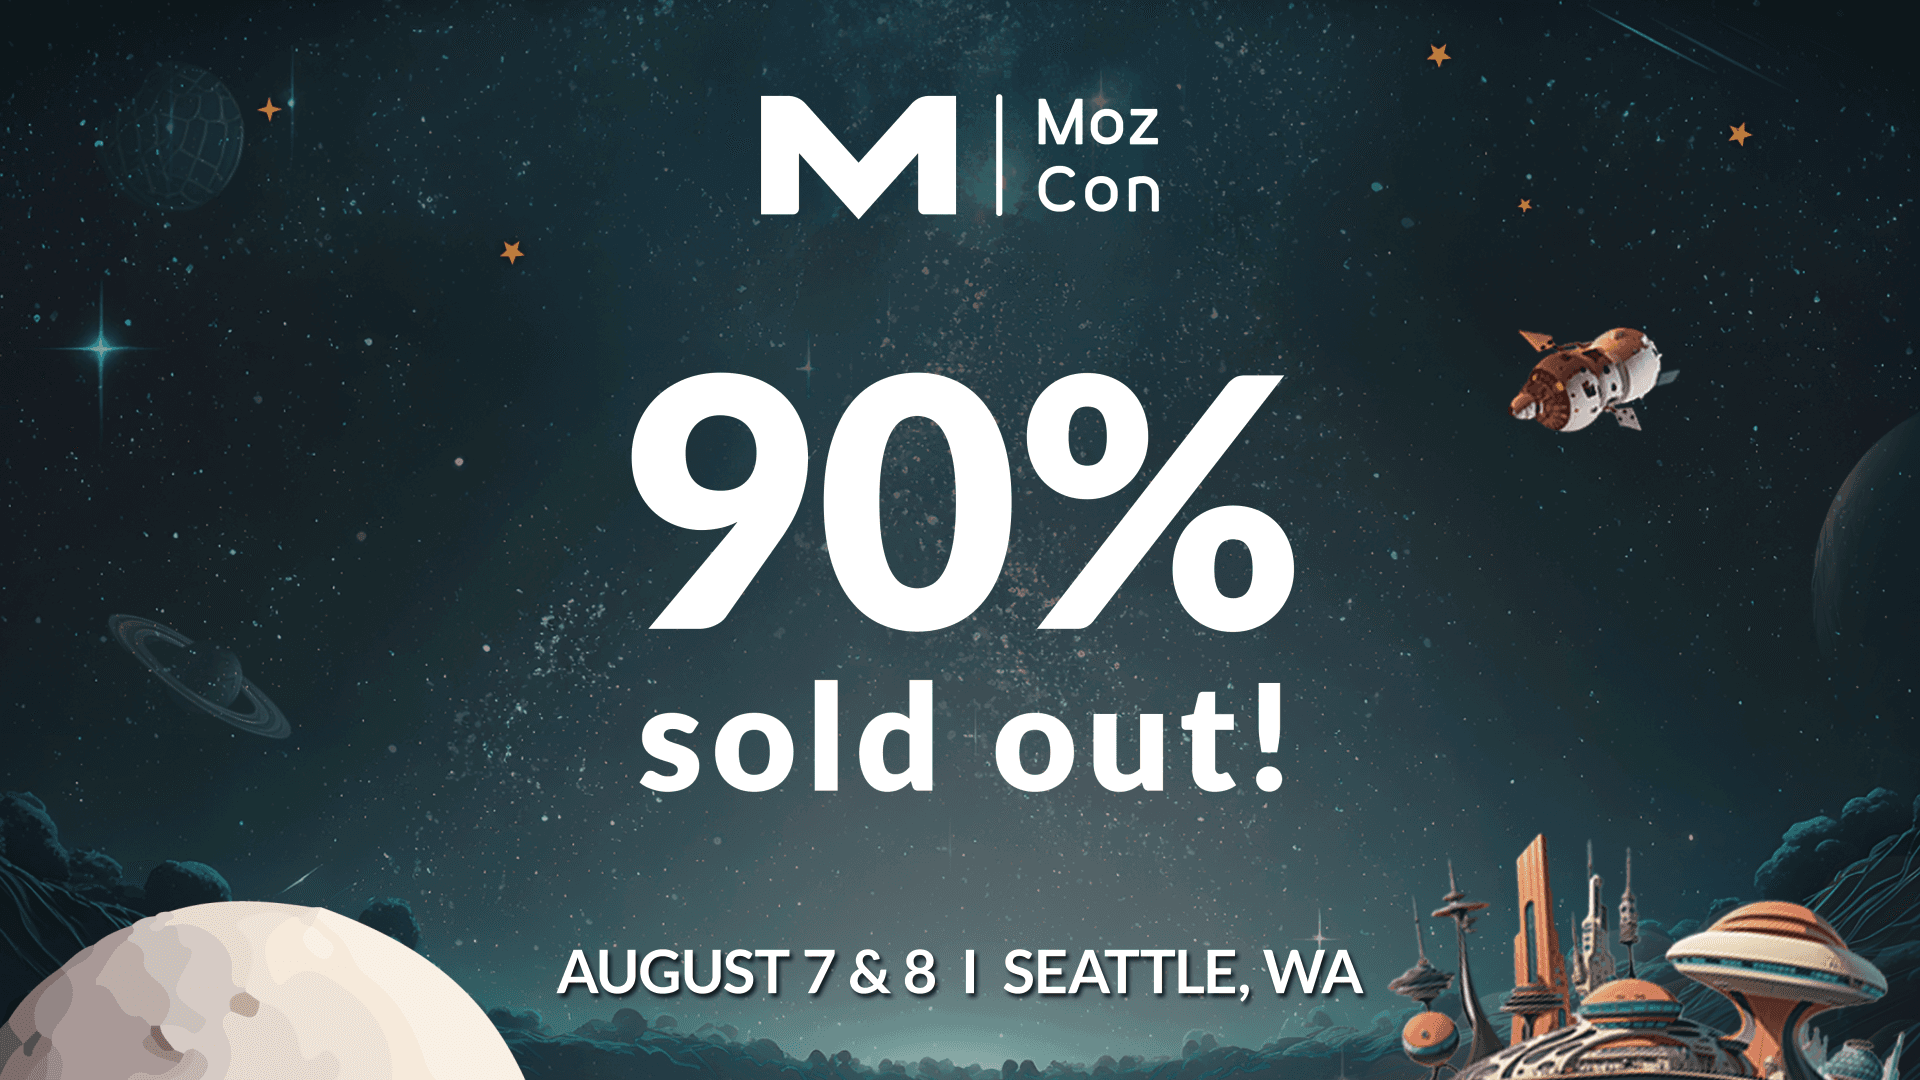 Image starting that MozCon tickets are 90% sold out.